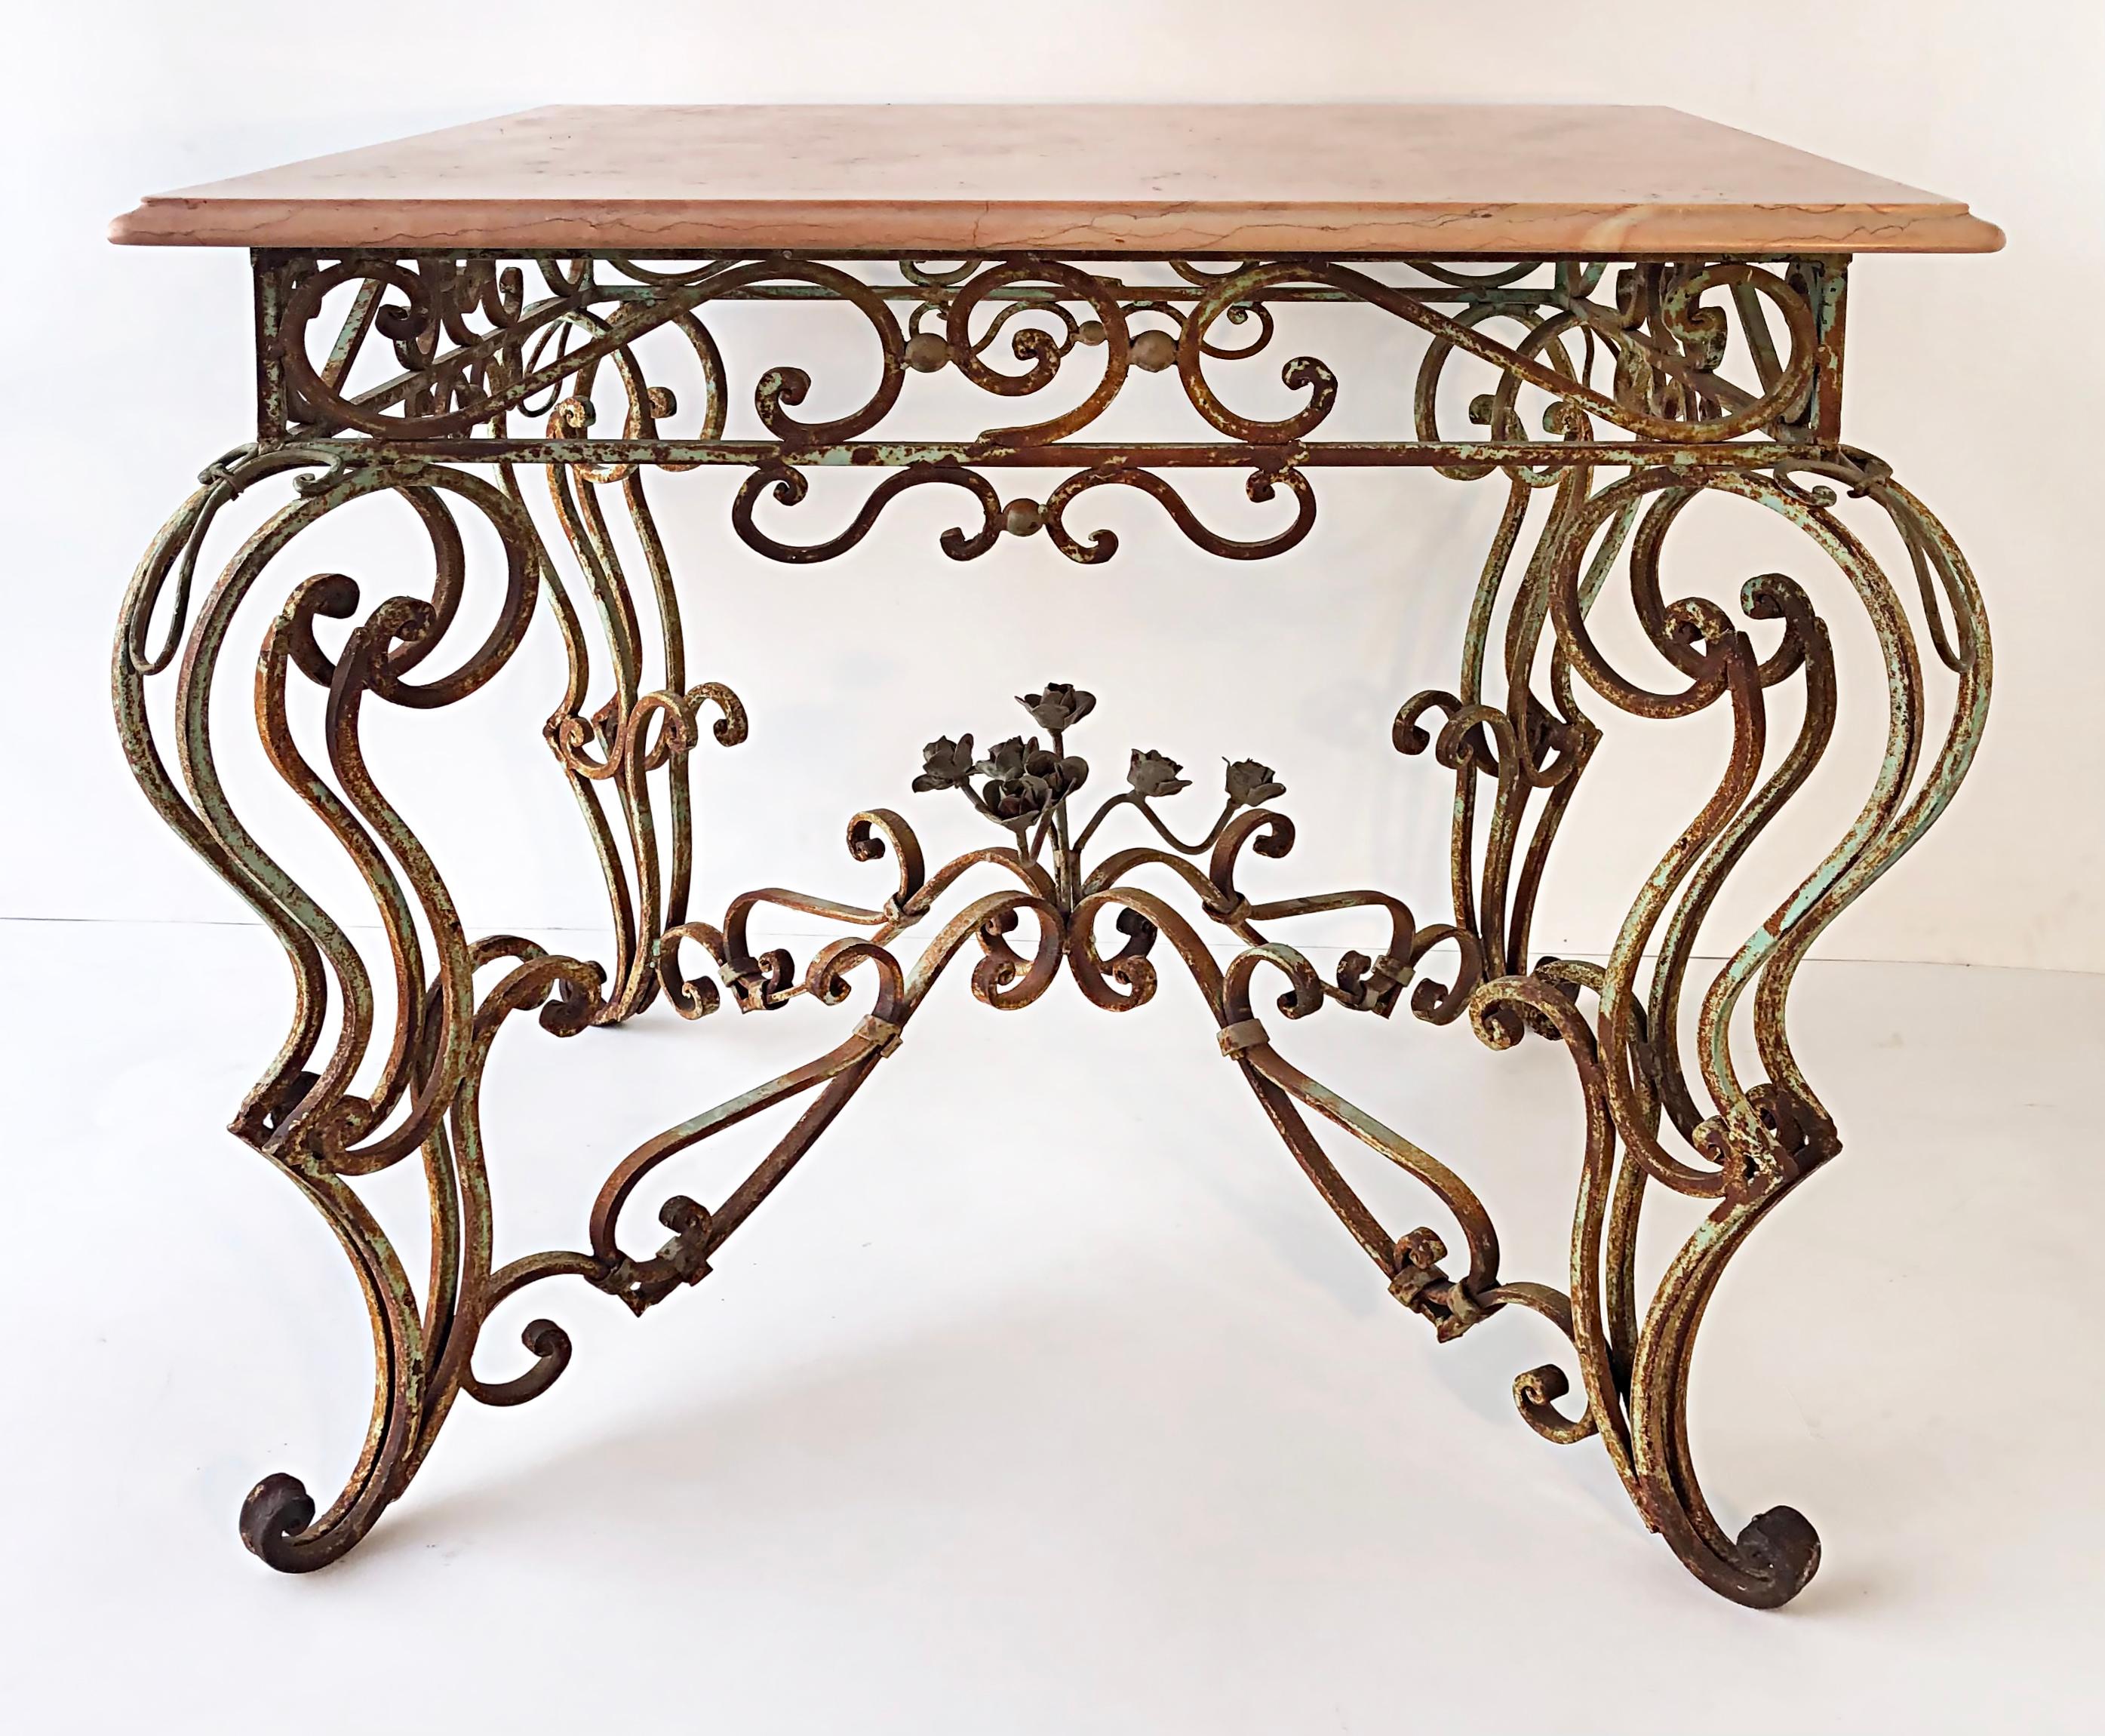 Painted Vintage Wrought Iron Marble Top Garden Table with Scrollwork and Flowers For Sale